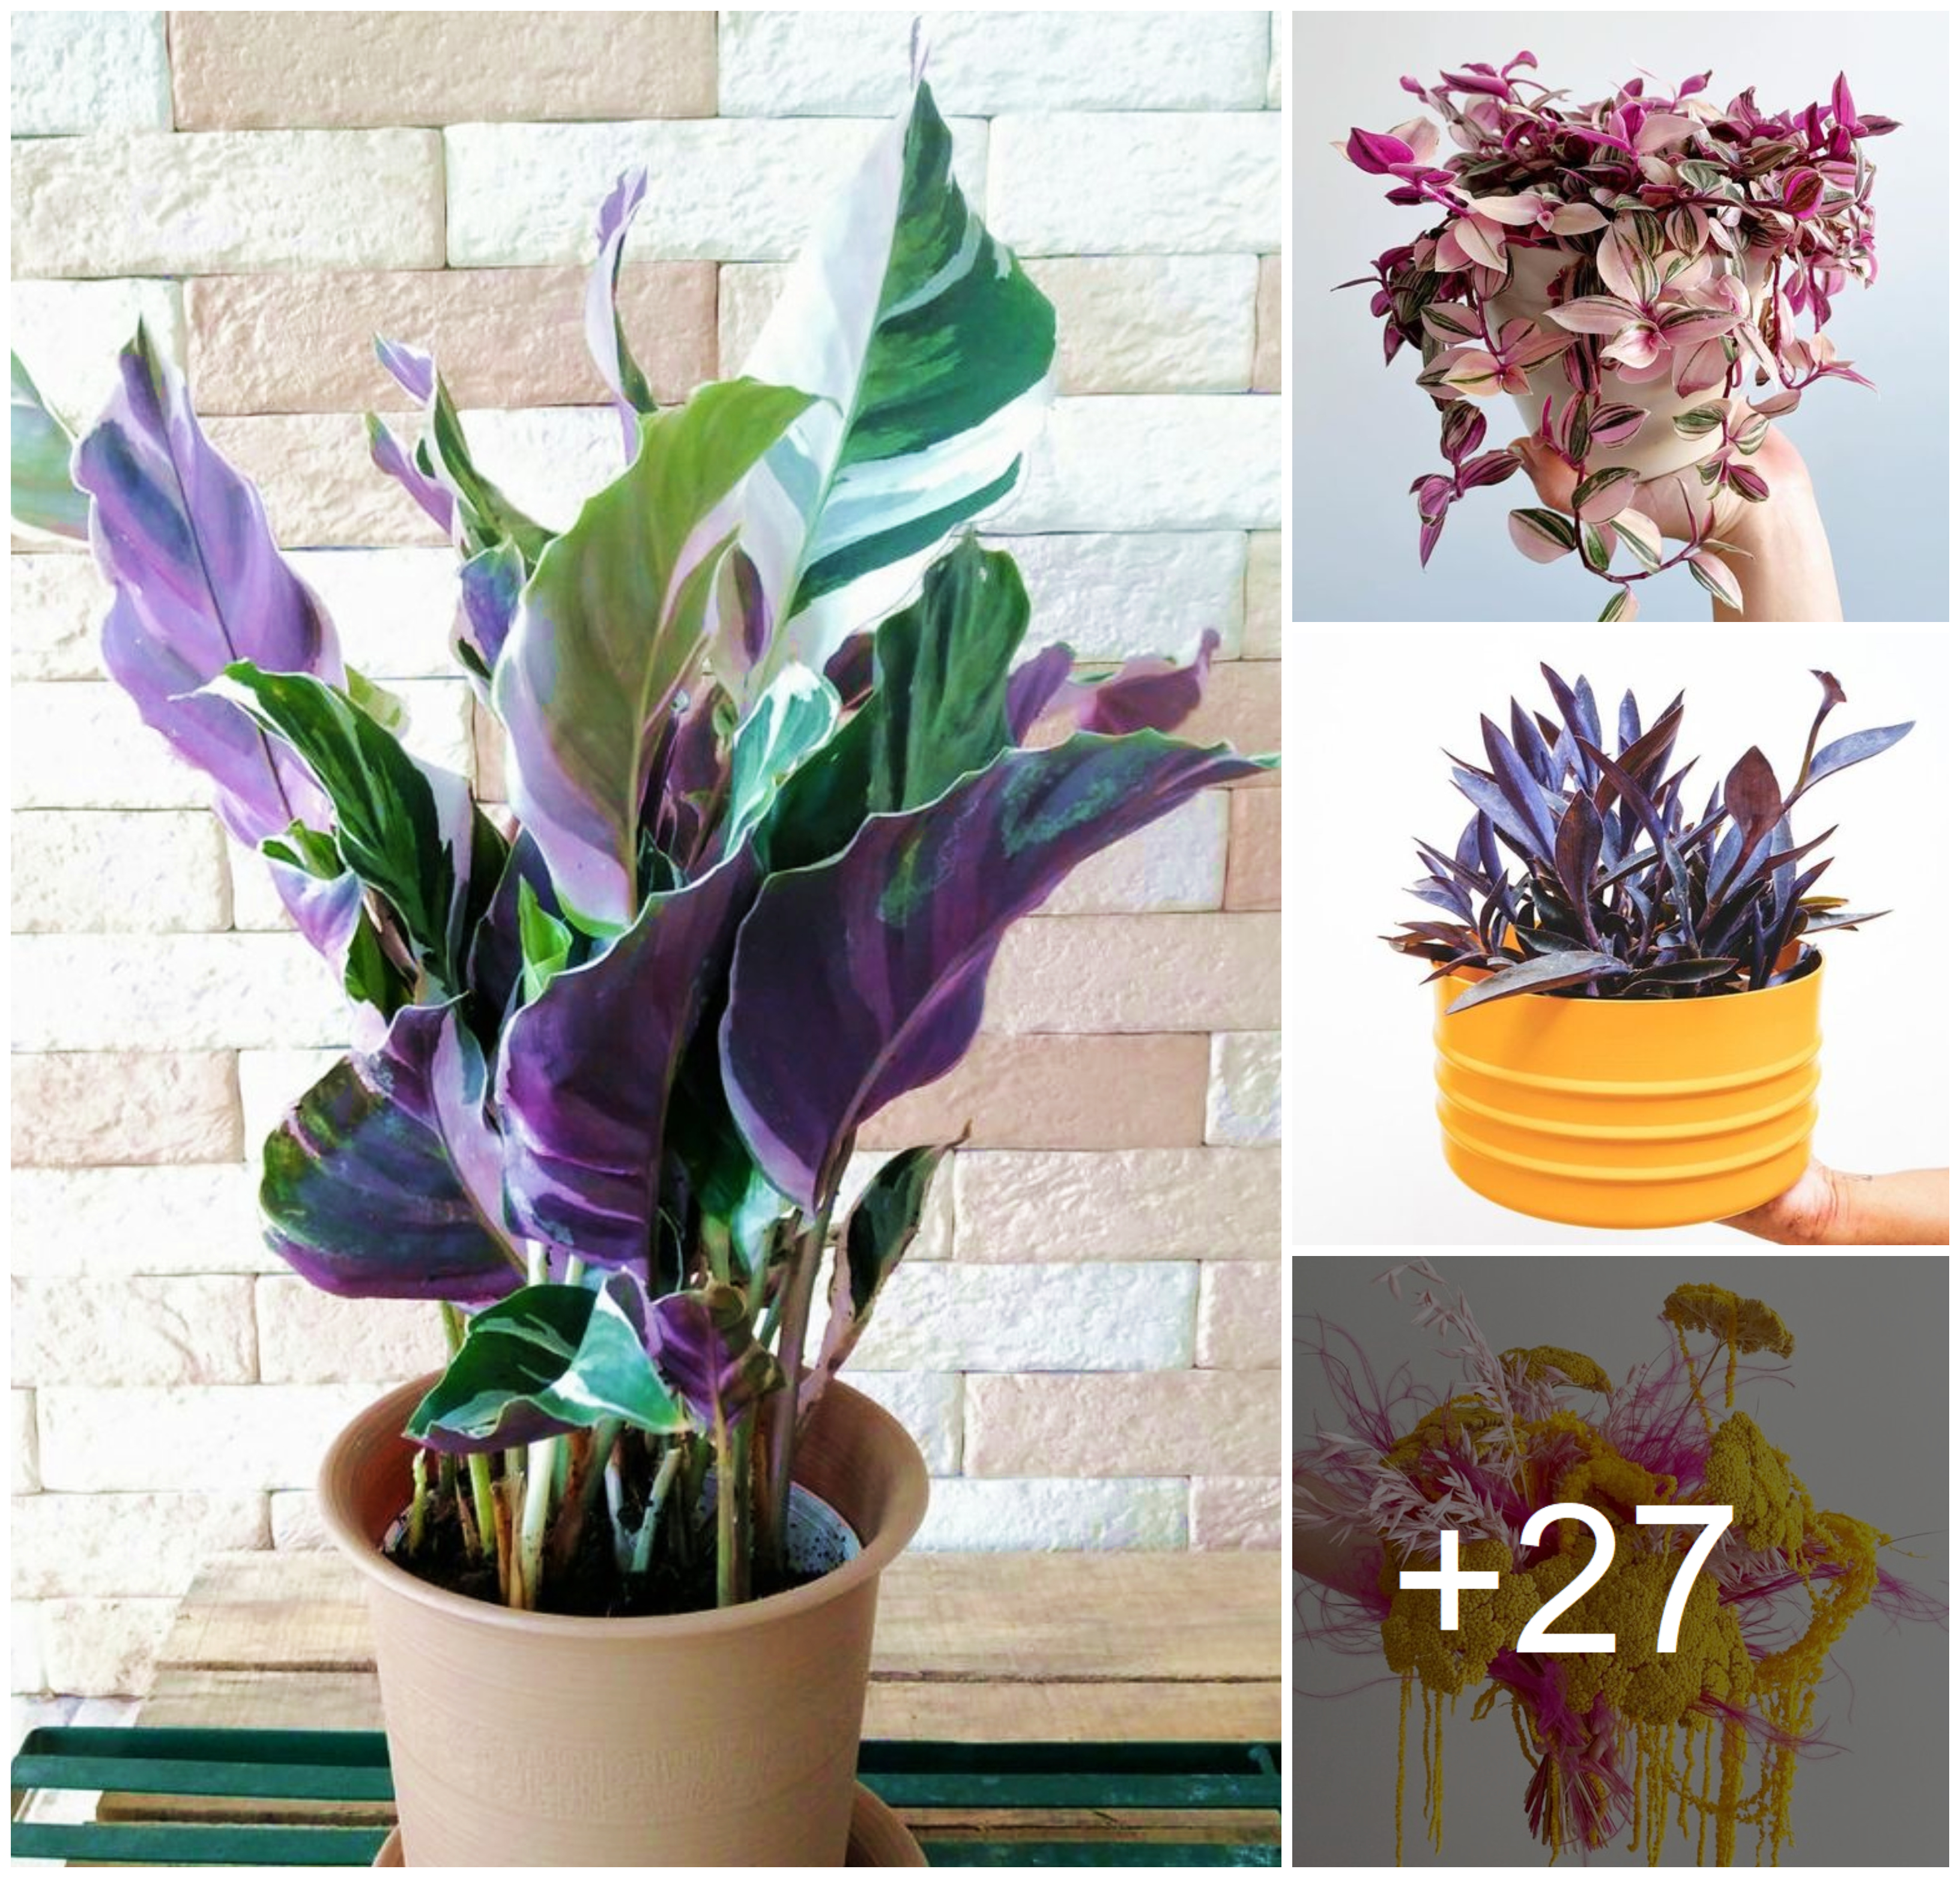 Decorate your garden and home with easy-to-grow colorful flower types